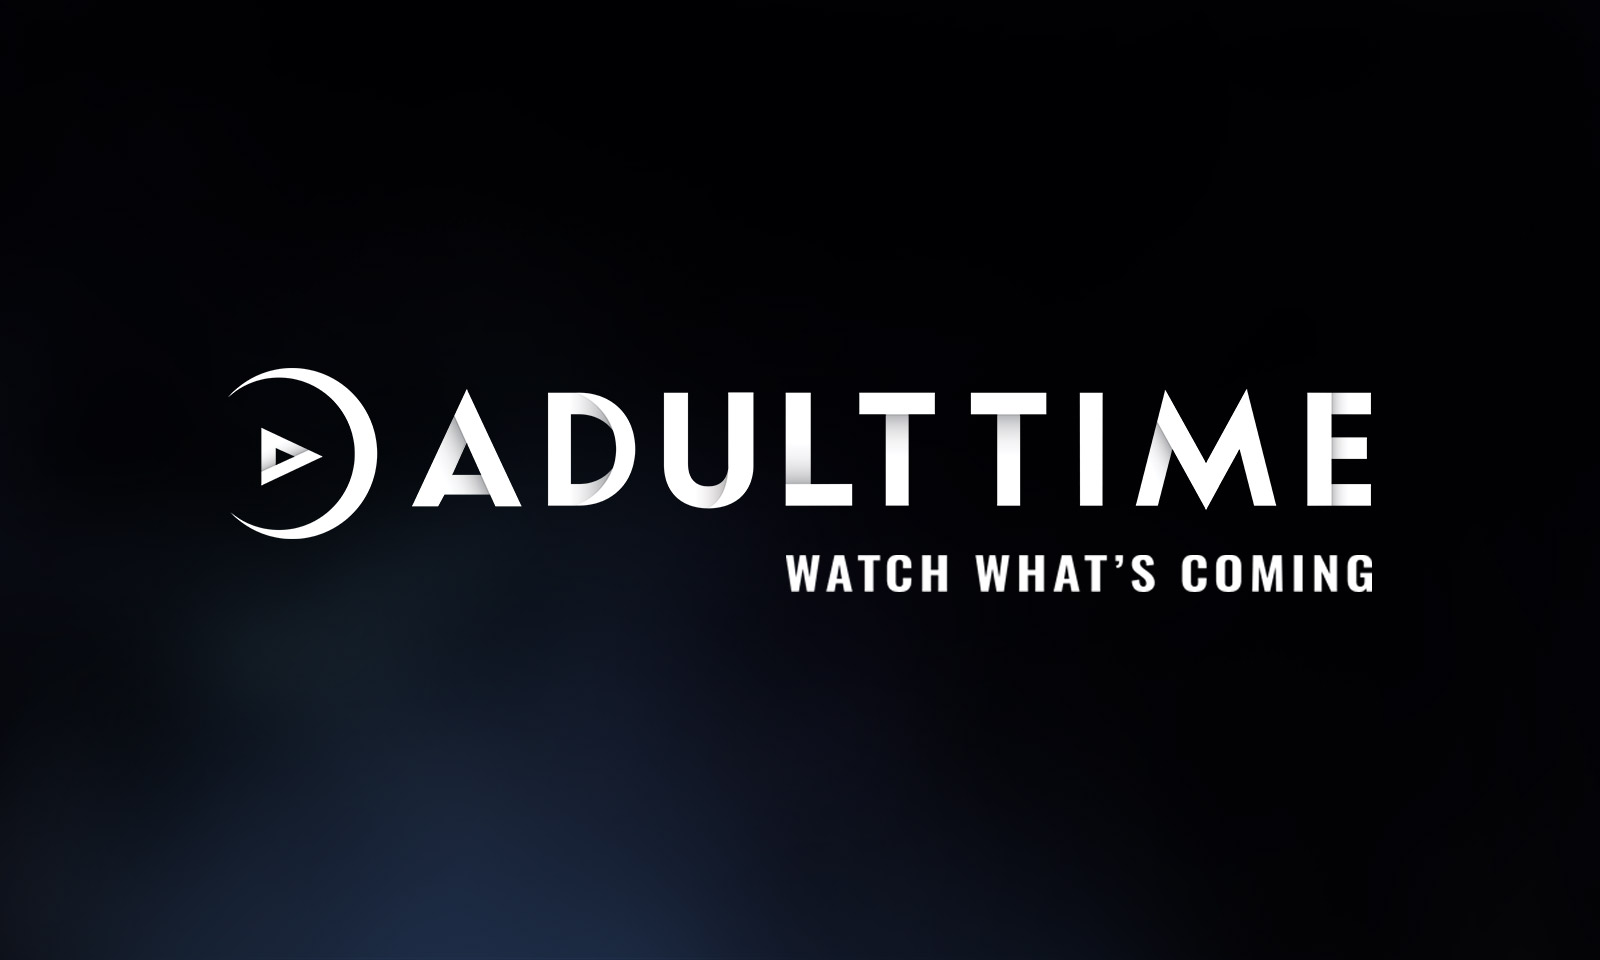 Gamma Officially Launches Adult Time Network